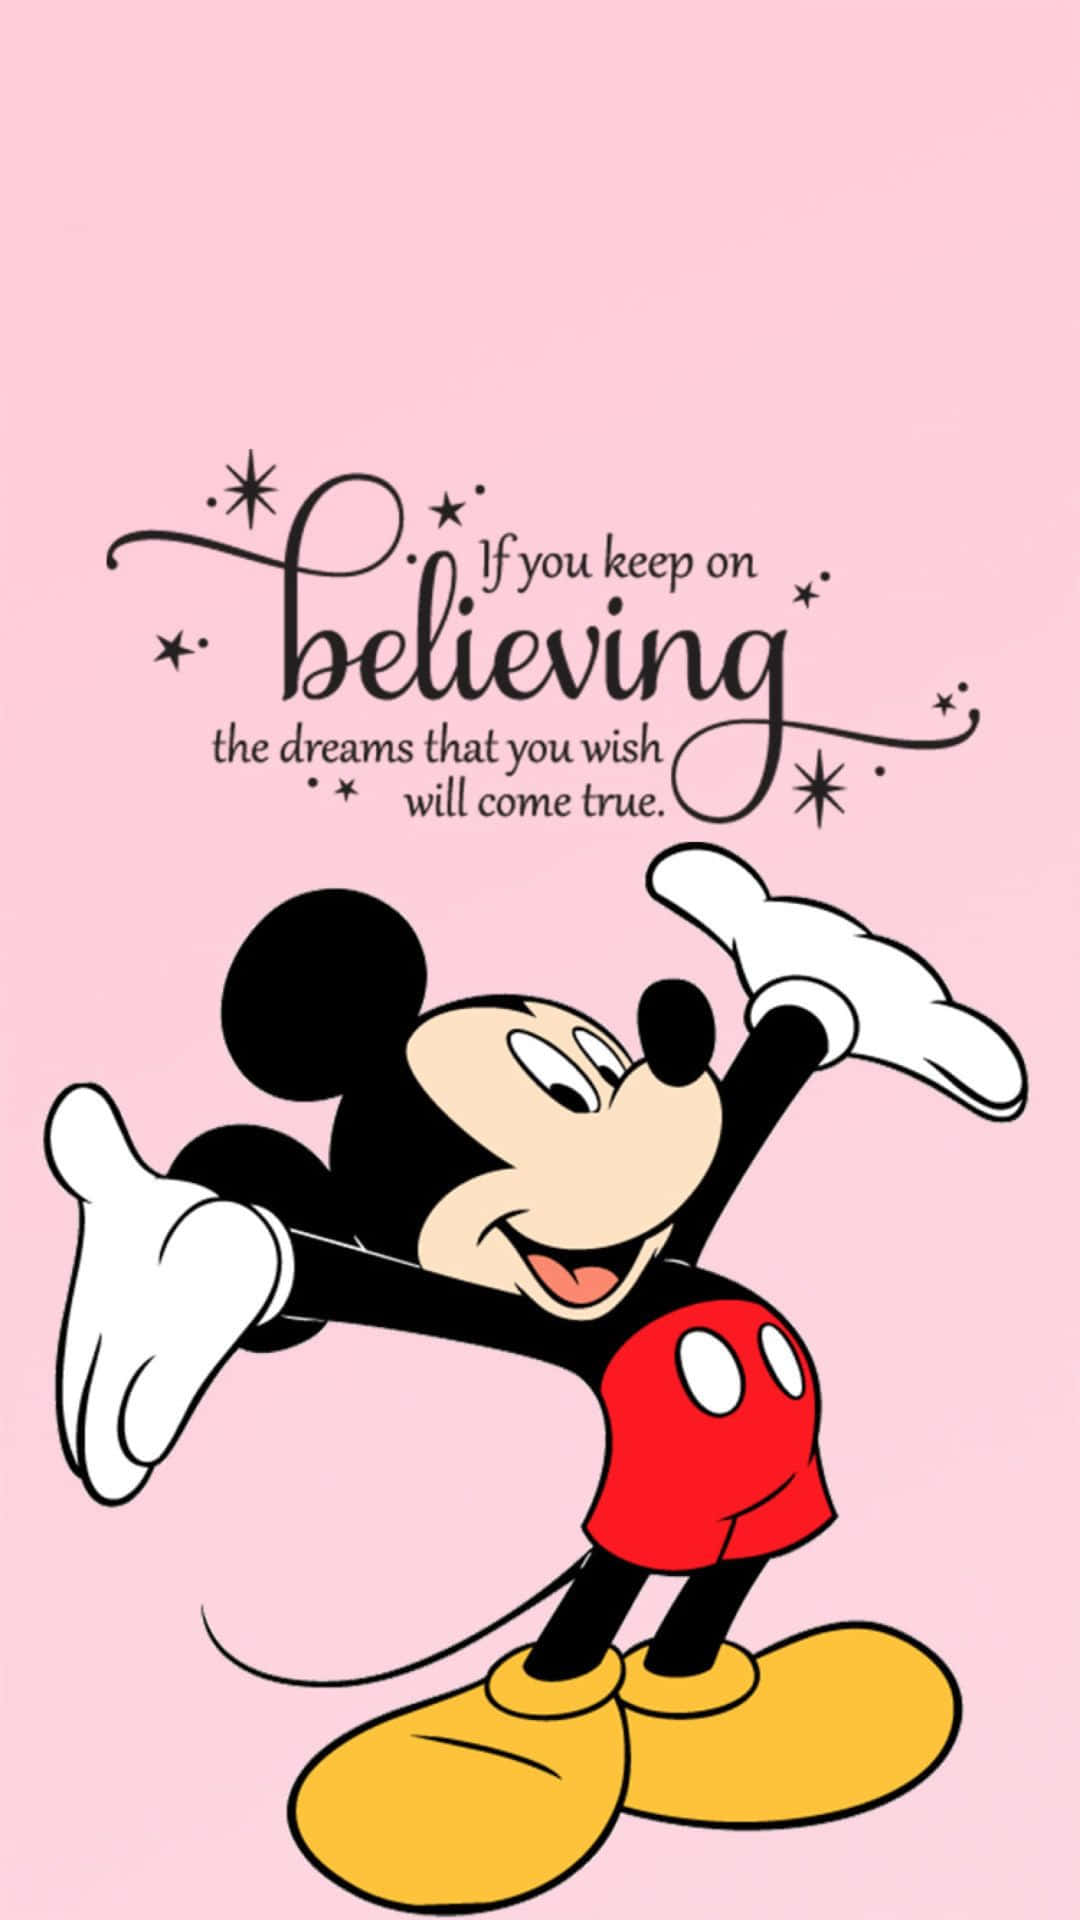 Mickey Mouse in his home - A safe and welcoming place Wallpaper